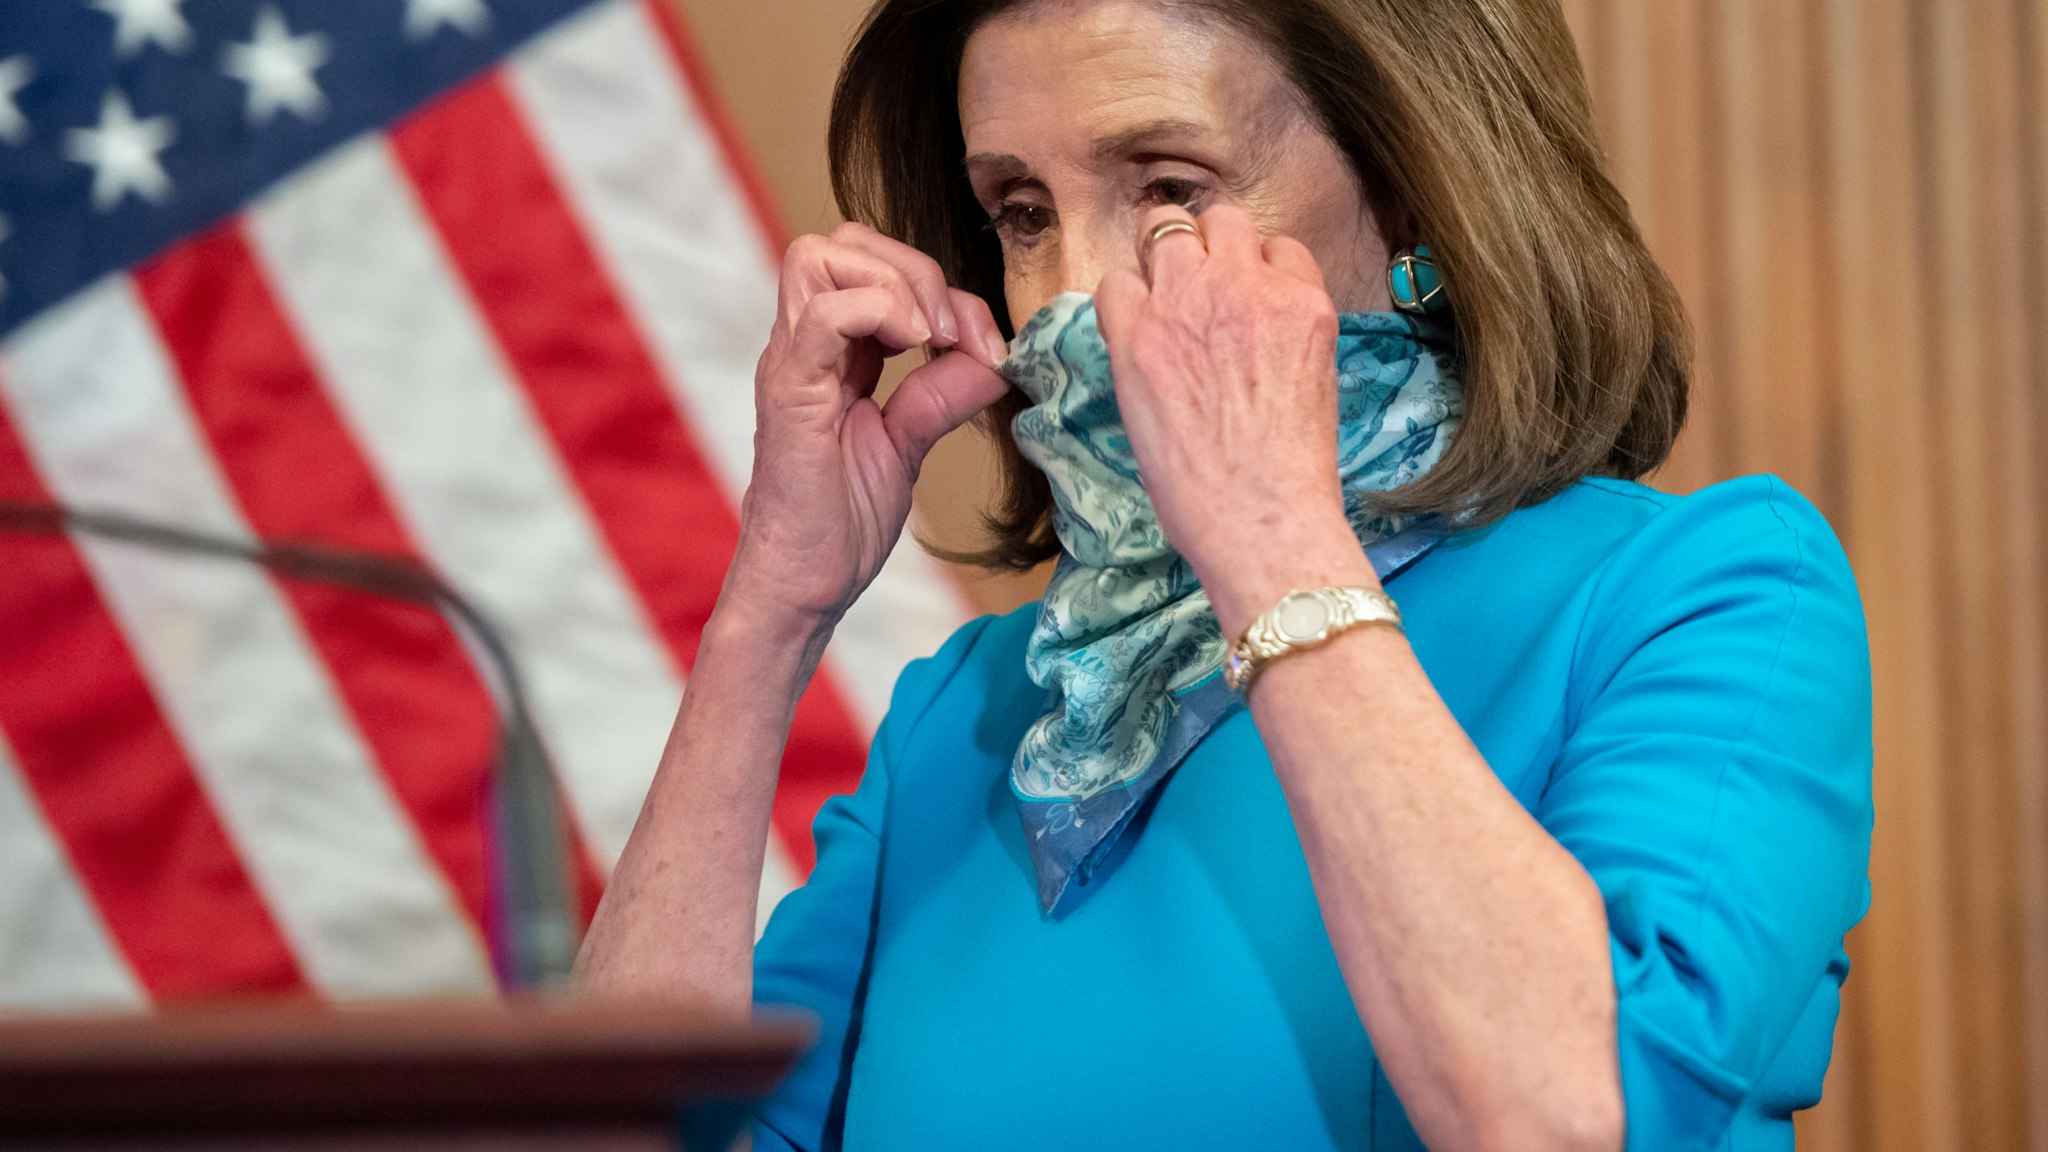 US Speaker of the House Nancy Pelosi arrives to speaks about the coronavirus pandemic during her weekly press conference at the US Capitol in Washington, DC, May 7, 2020. (Photo by SAUL LOEB / AFP) (Photo by SAUL LOEB/AFP via Getty Images)